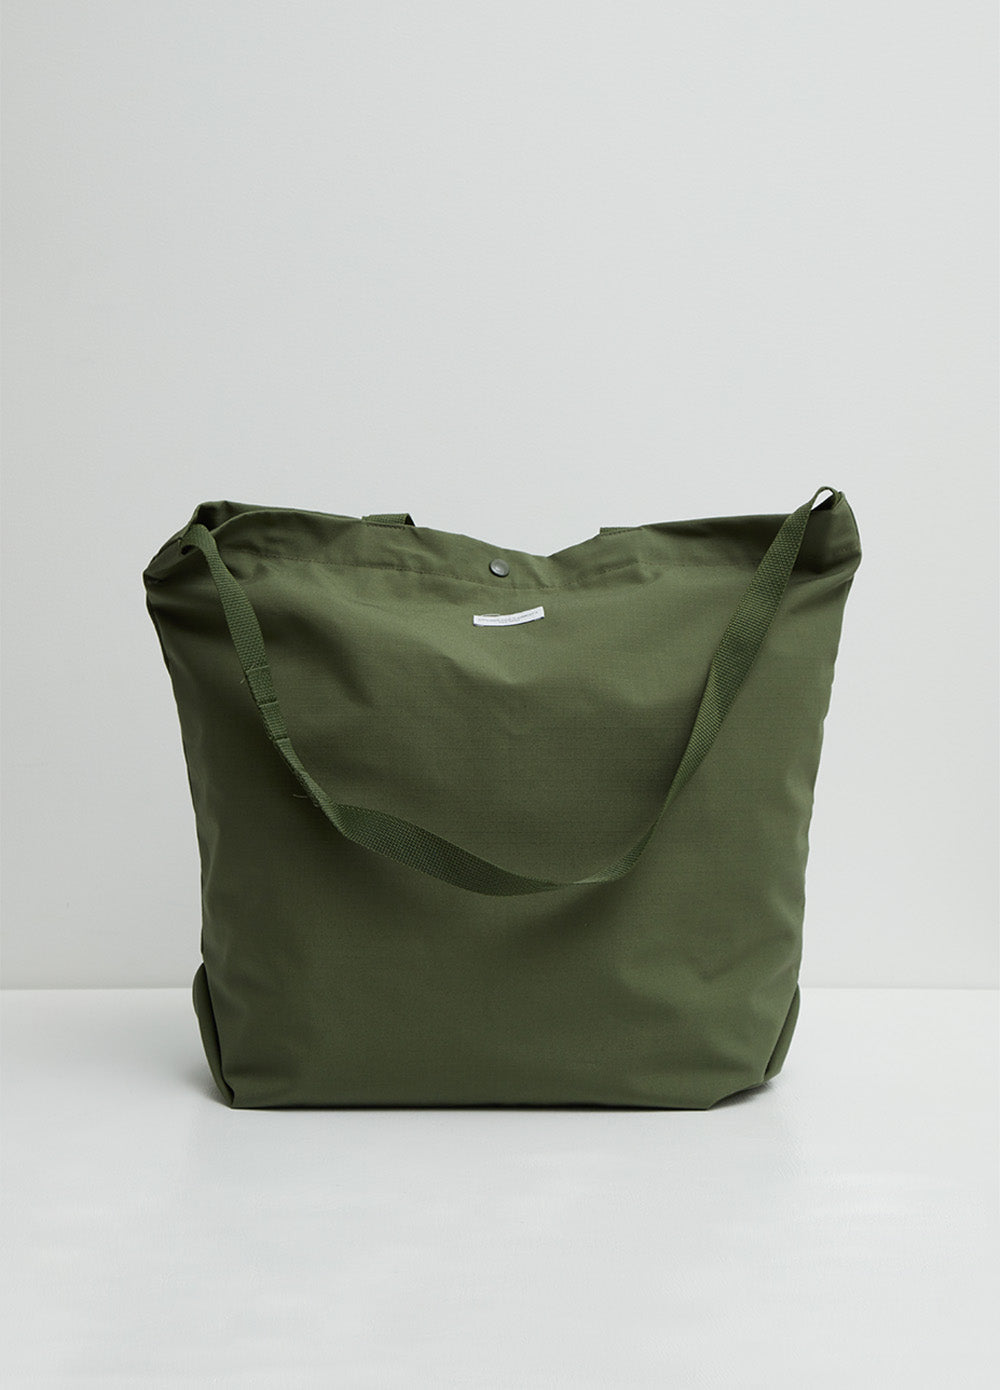 Carry-all Tote